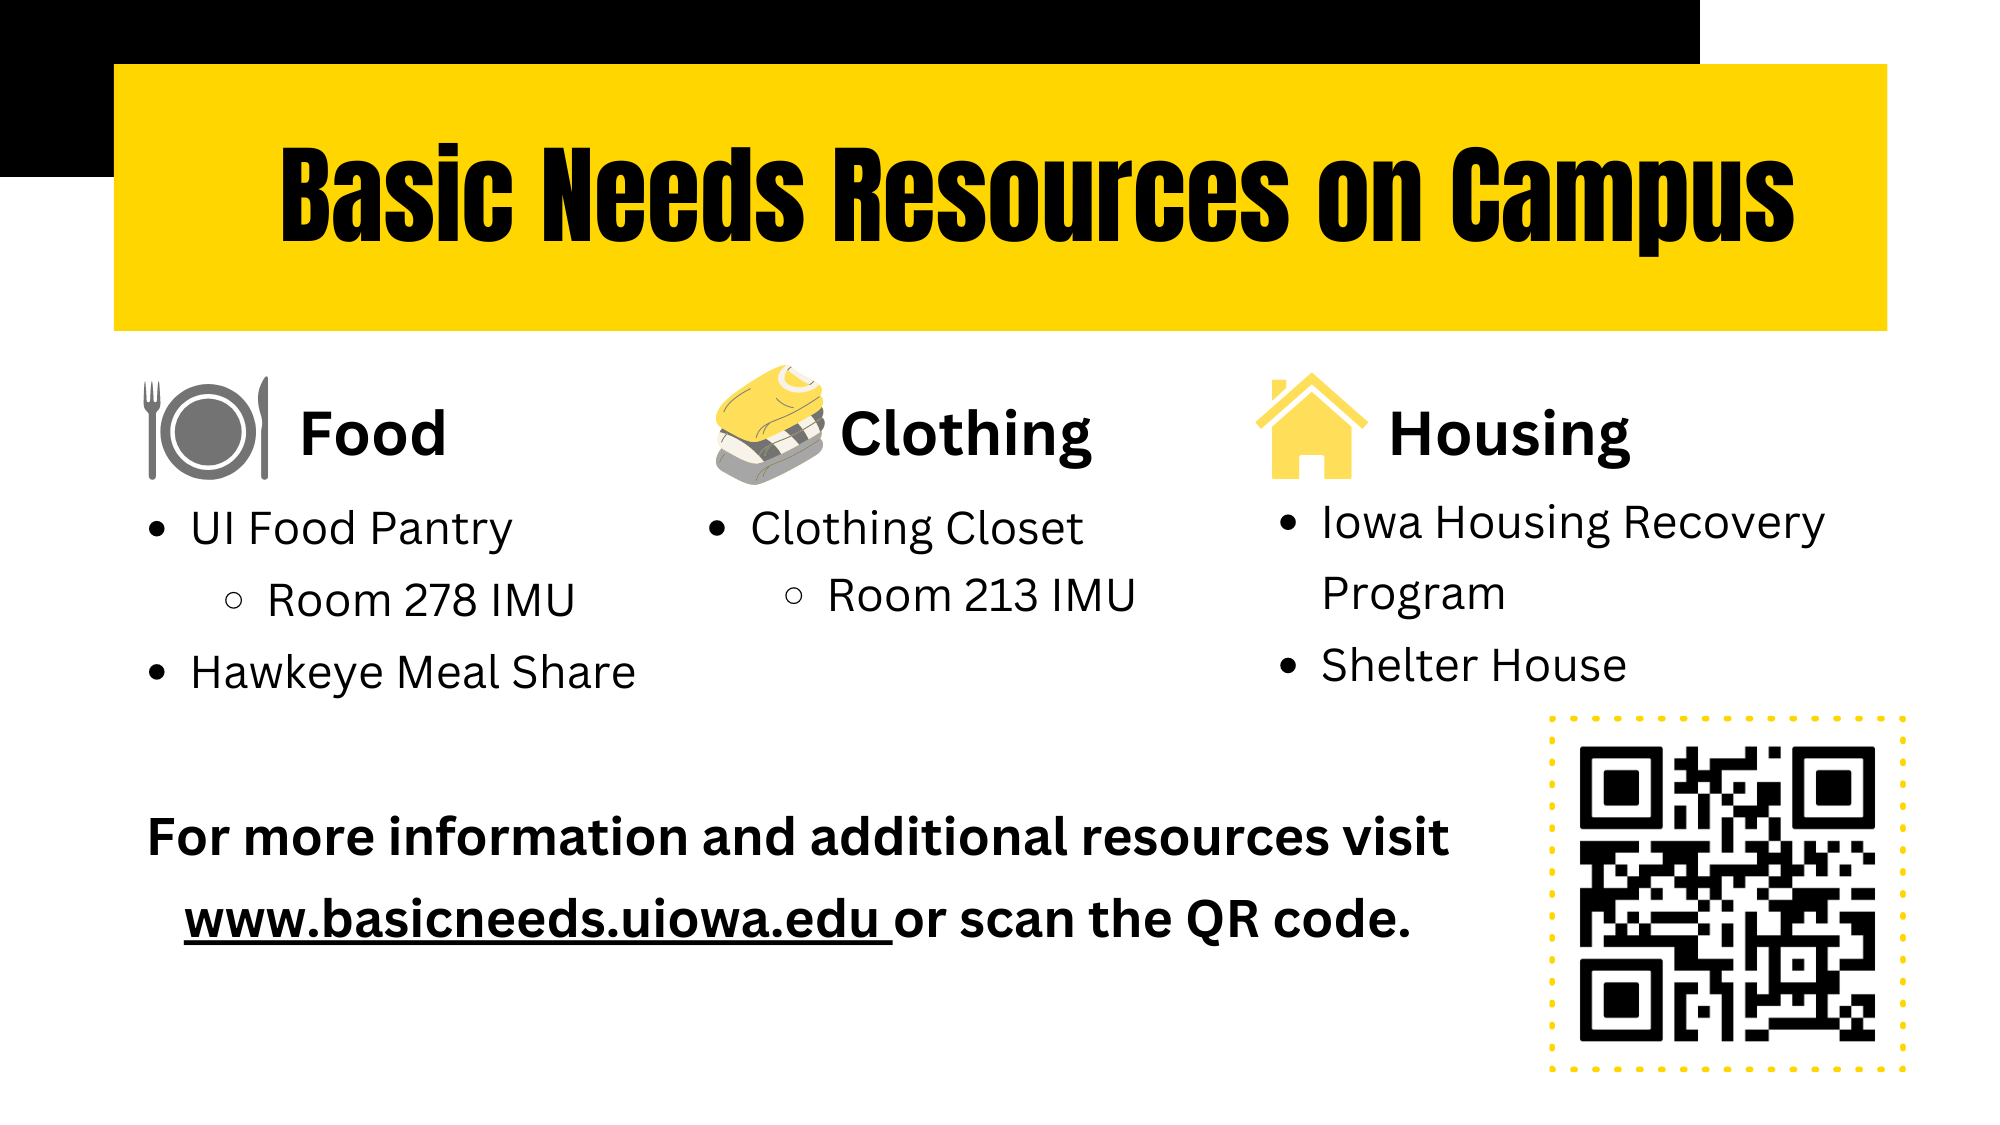 Basic Needs Resources on Campus for food, clothing, and housing.